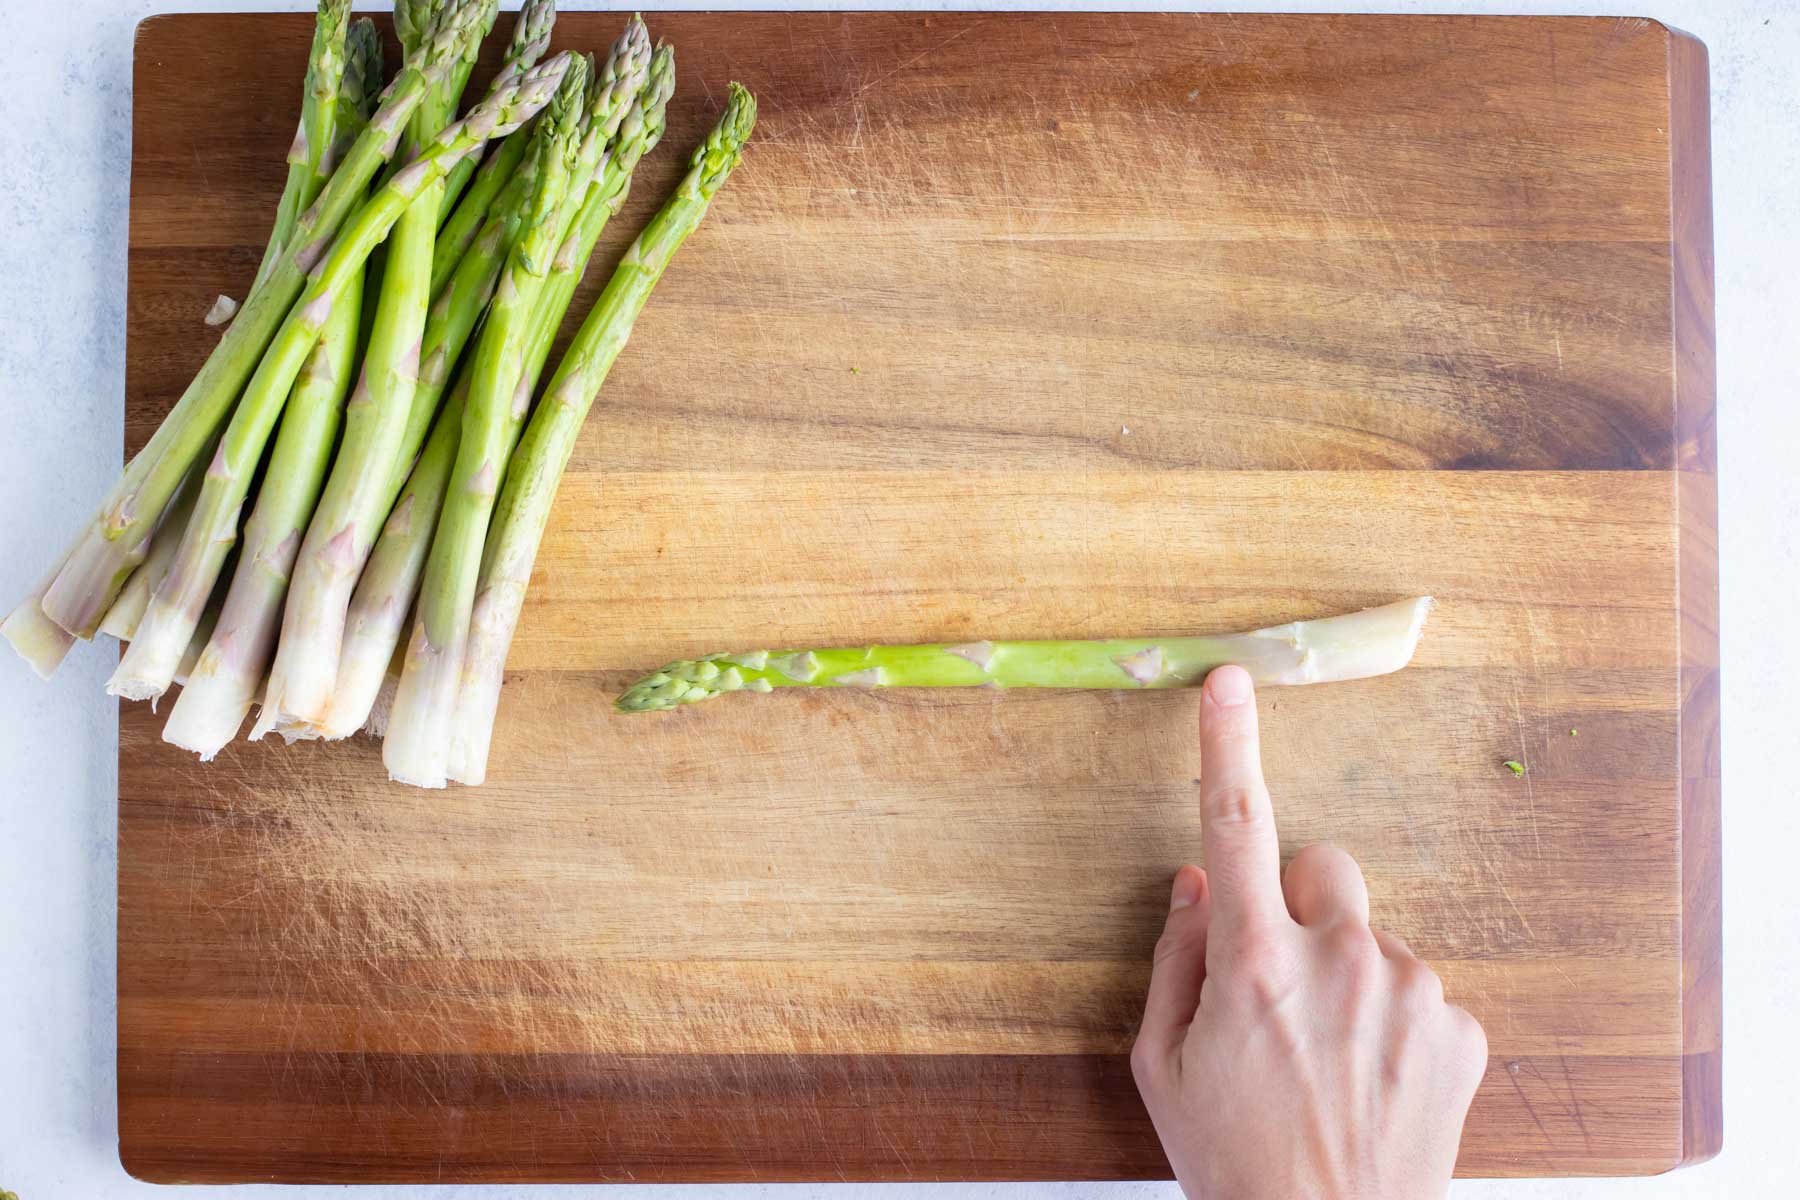 The end of the asparagus is removed.